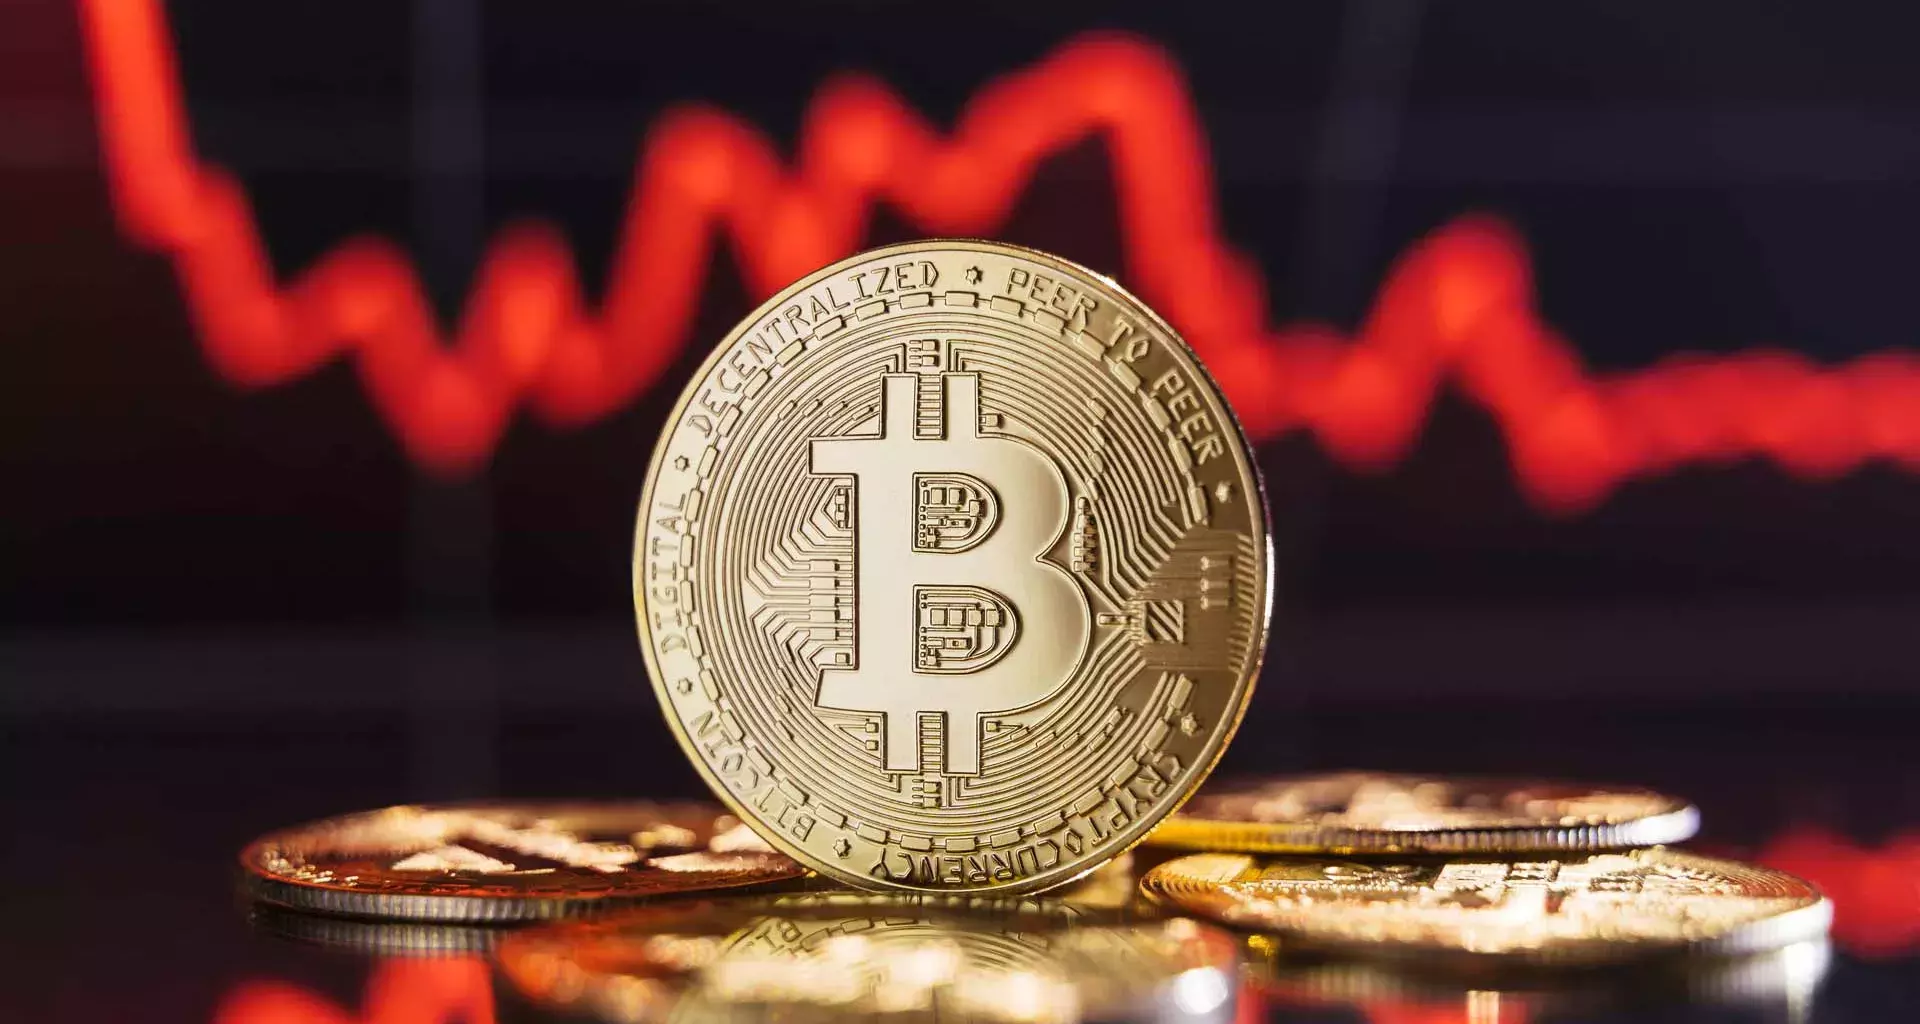 Bitcoin in the financial markets: what you need to know